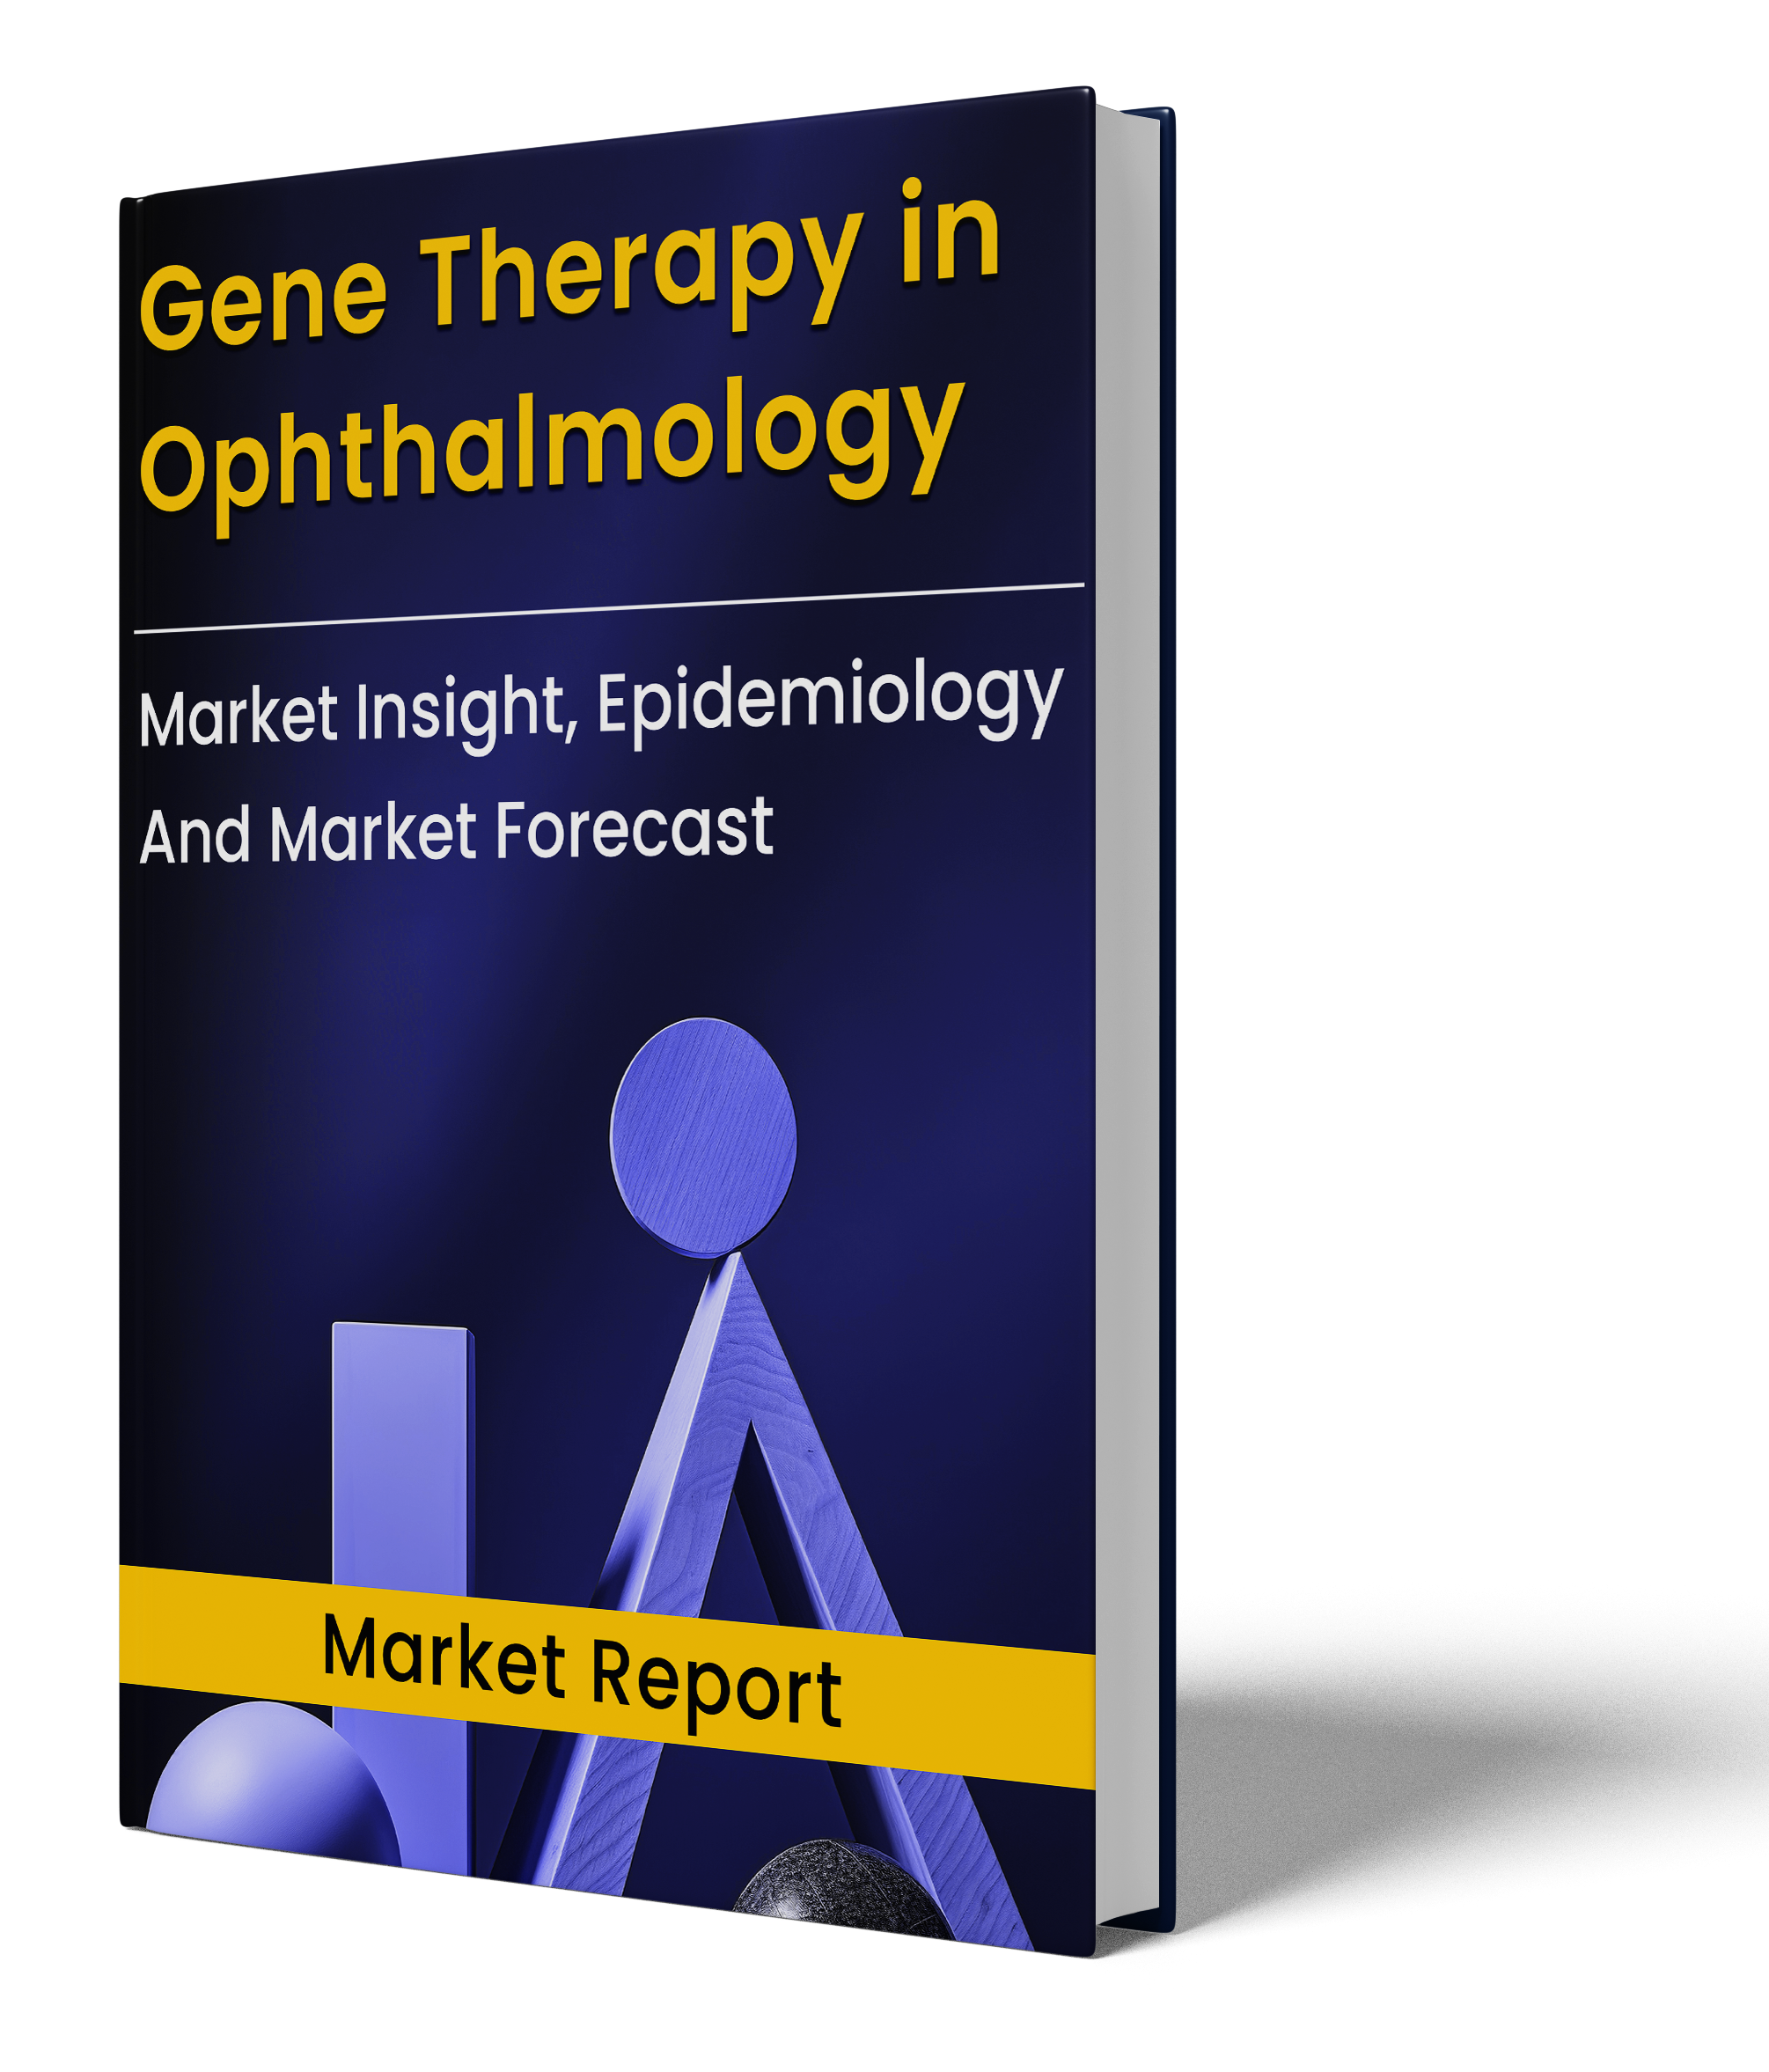 Gene Therapy in Ophthalmology Market Report